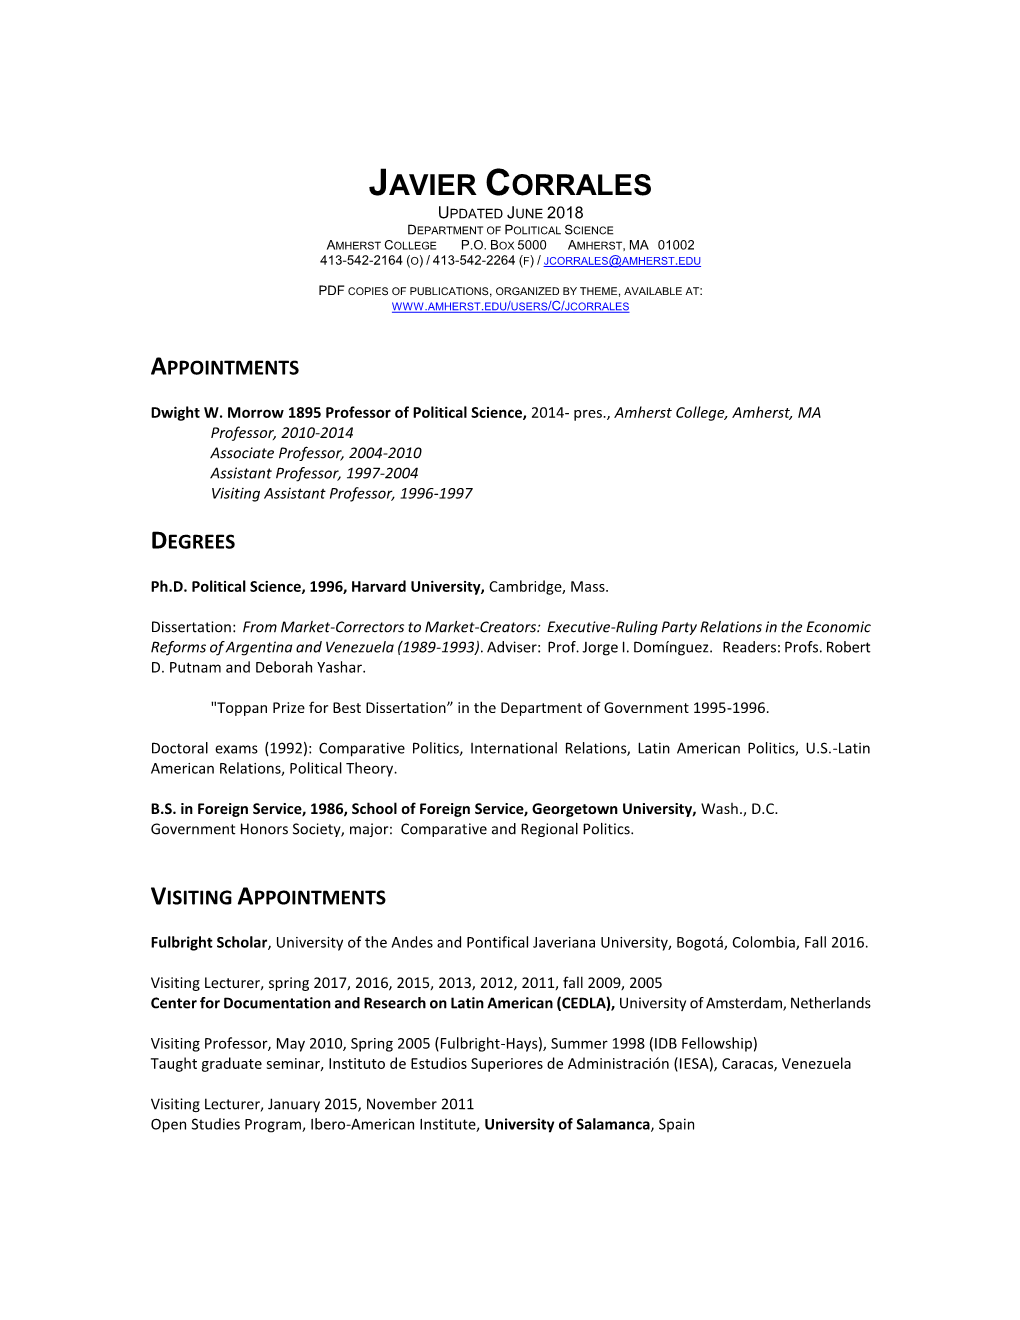 Javier Corrales Updated June 2018 Department of Political Science Amherst College P.O